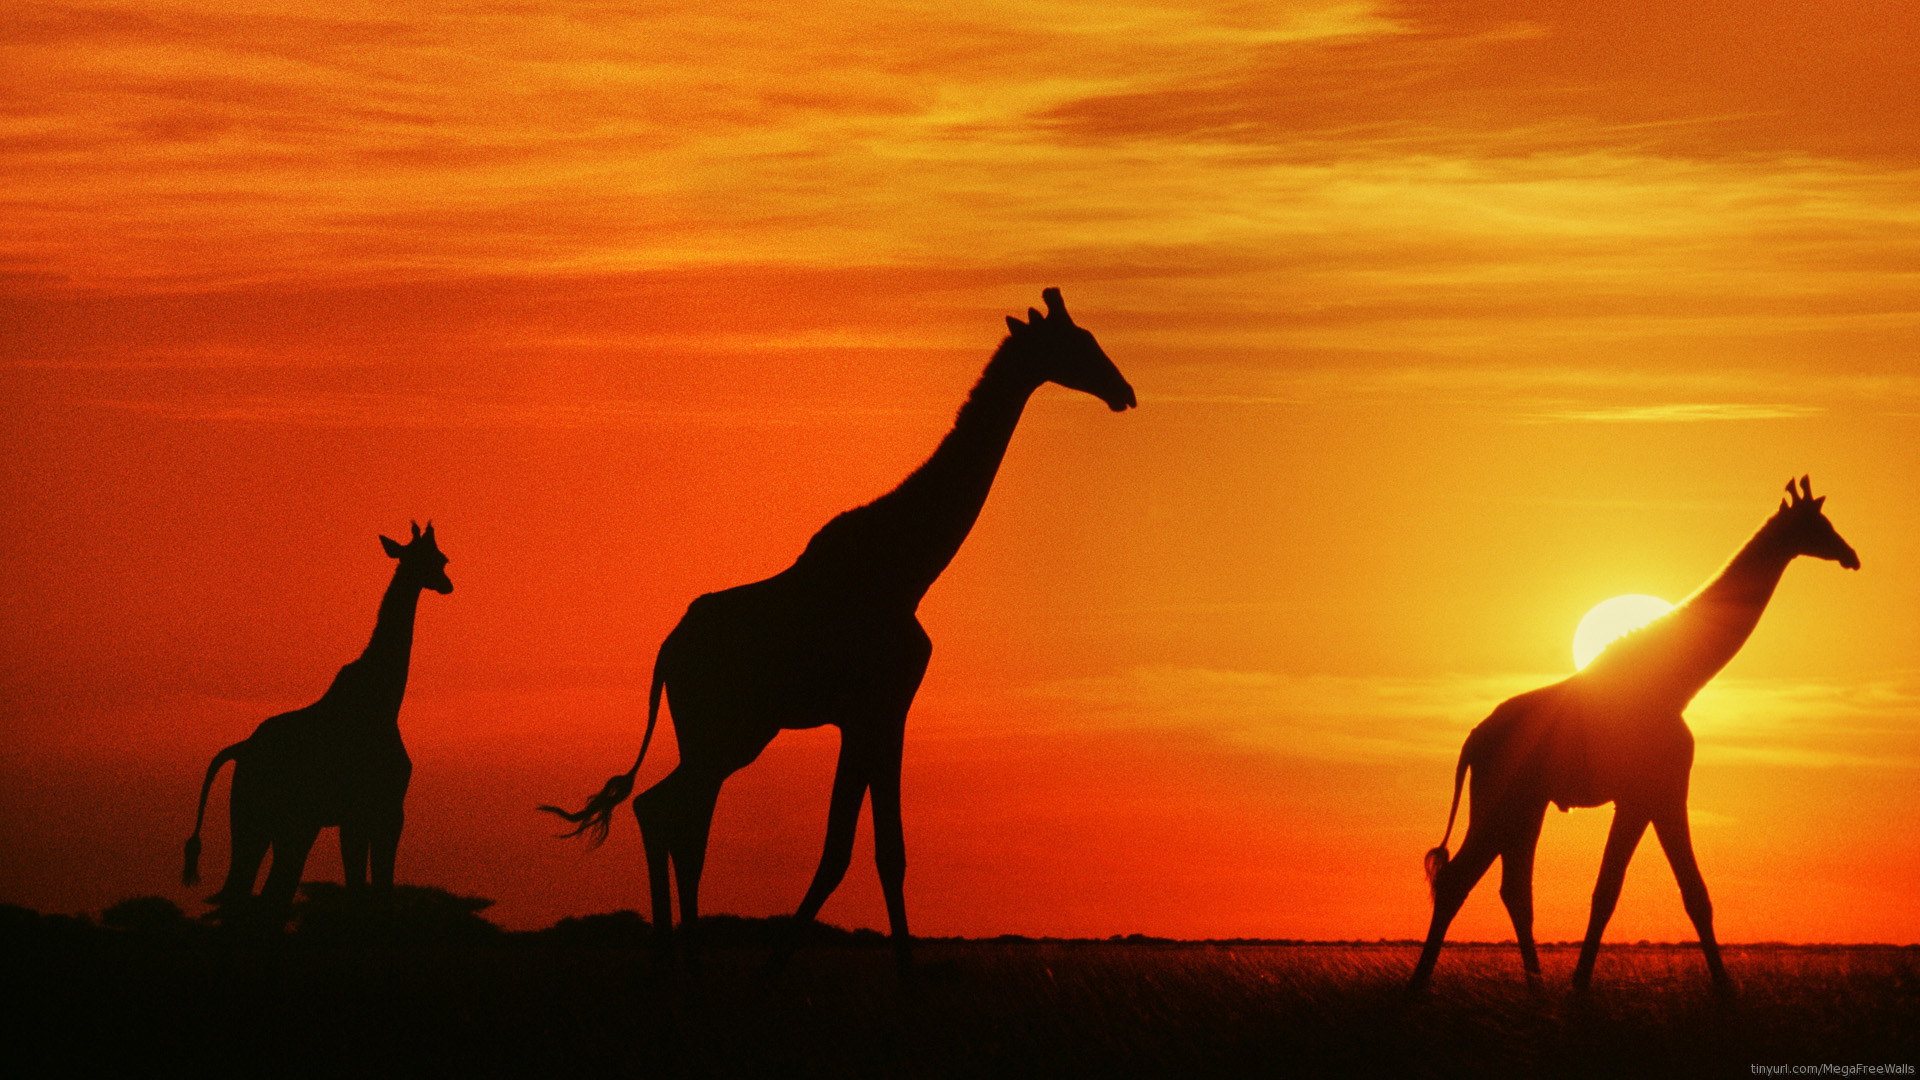 Giraffe Wallpaper Image Photos Pictures Background